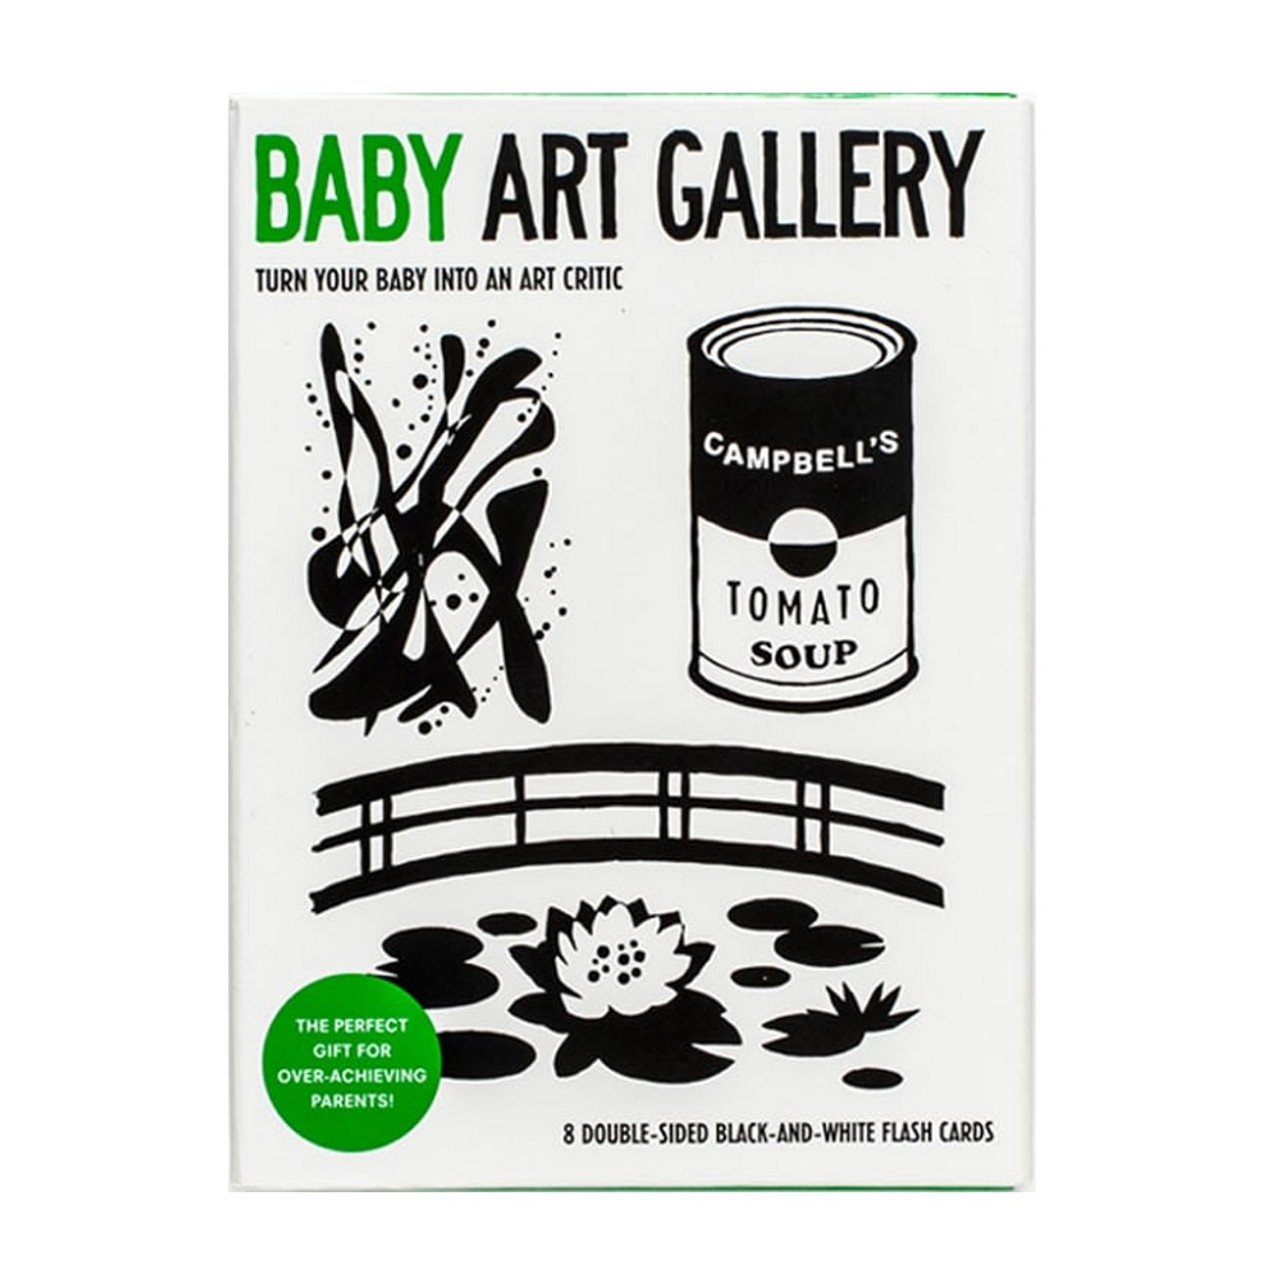 Baby Books for the Art Museum